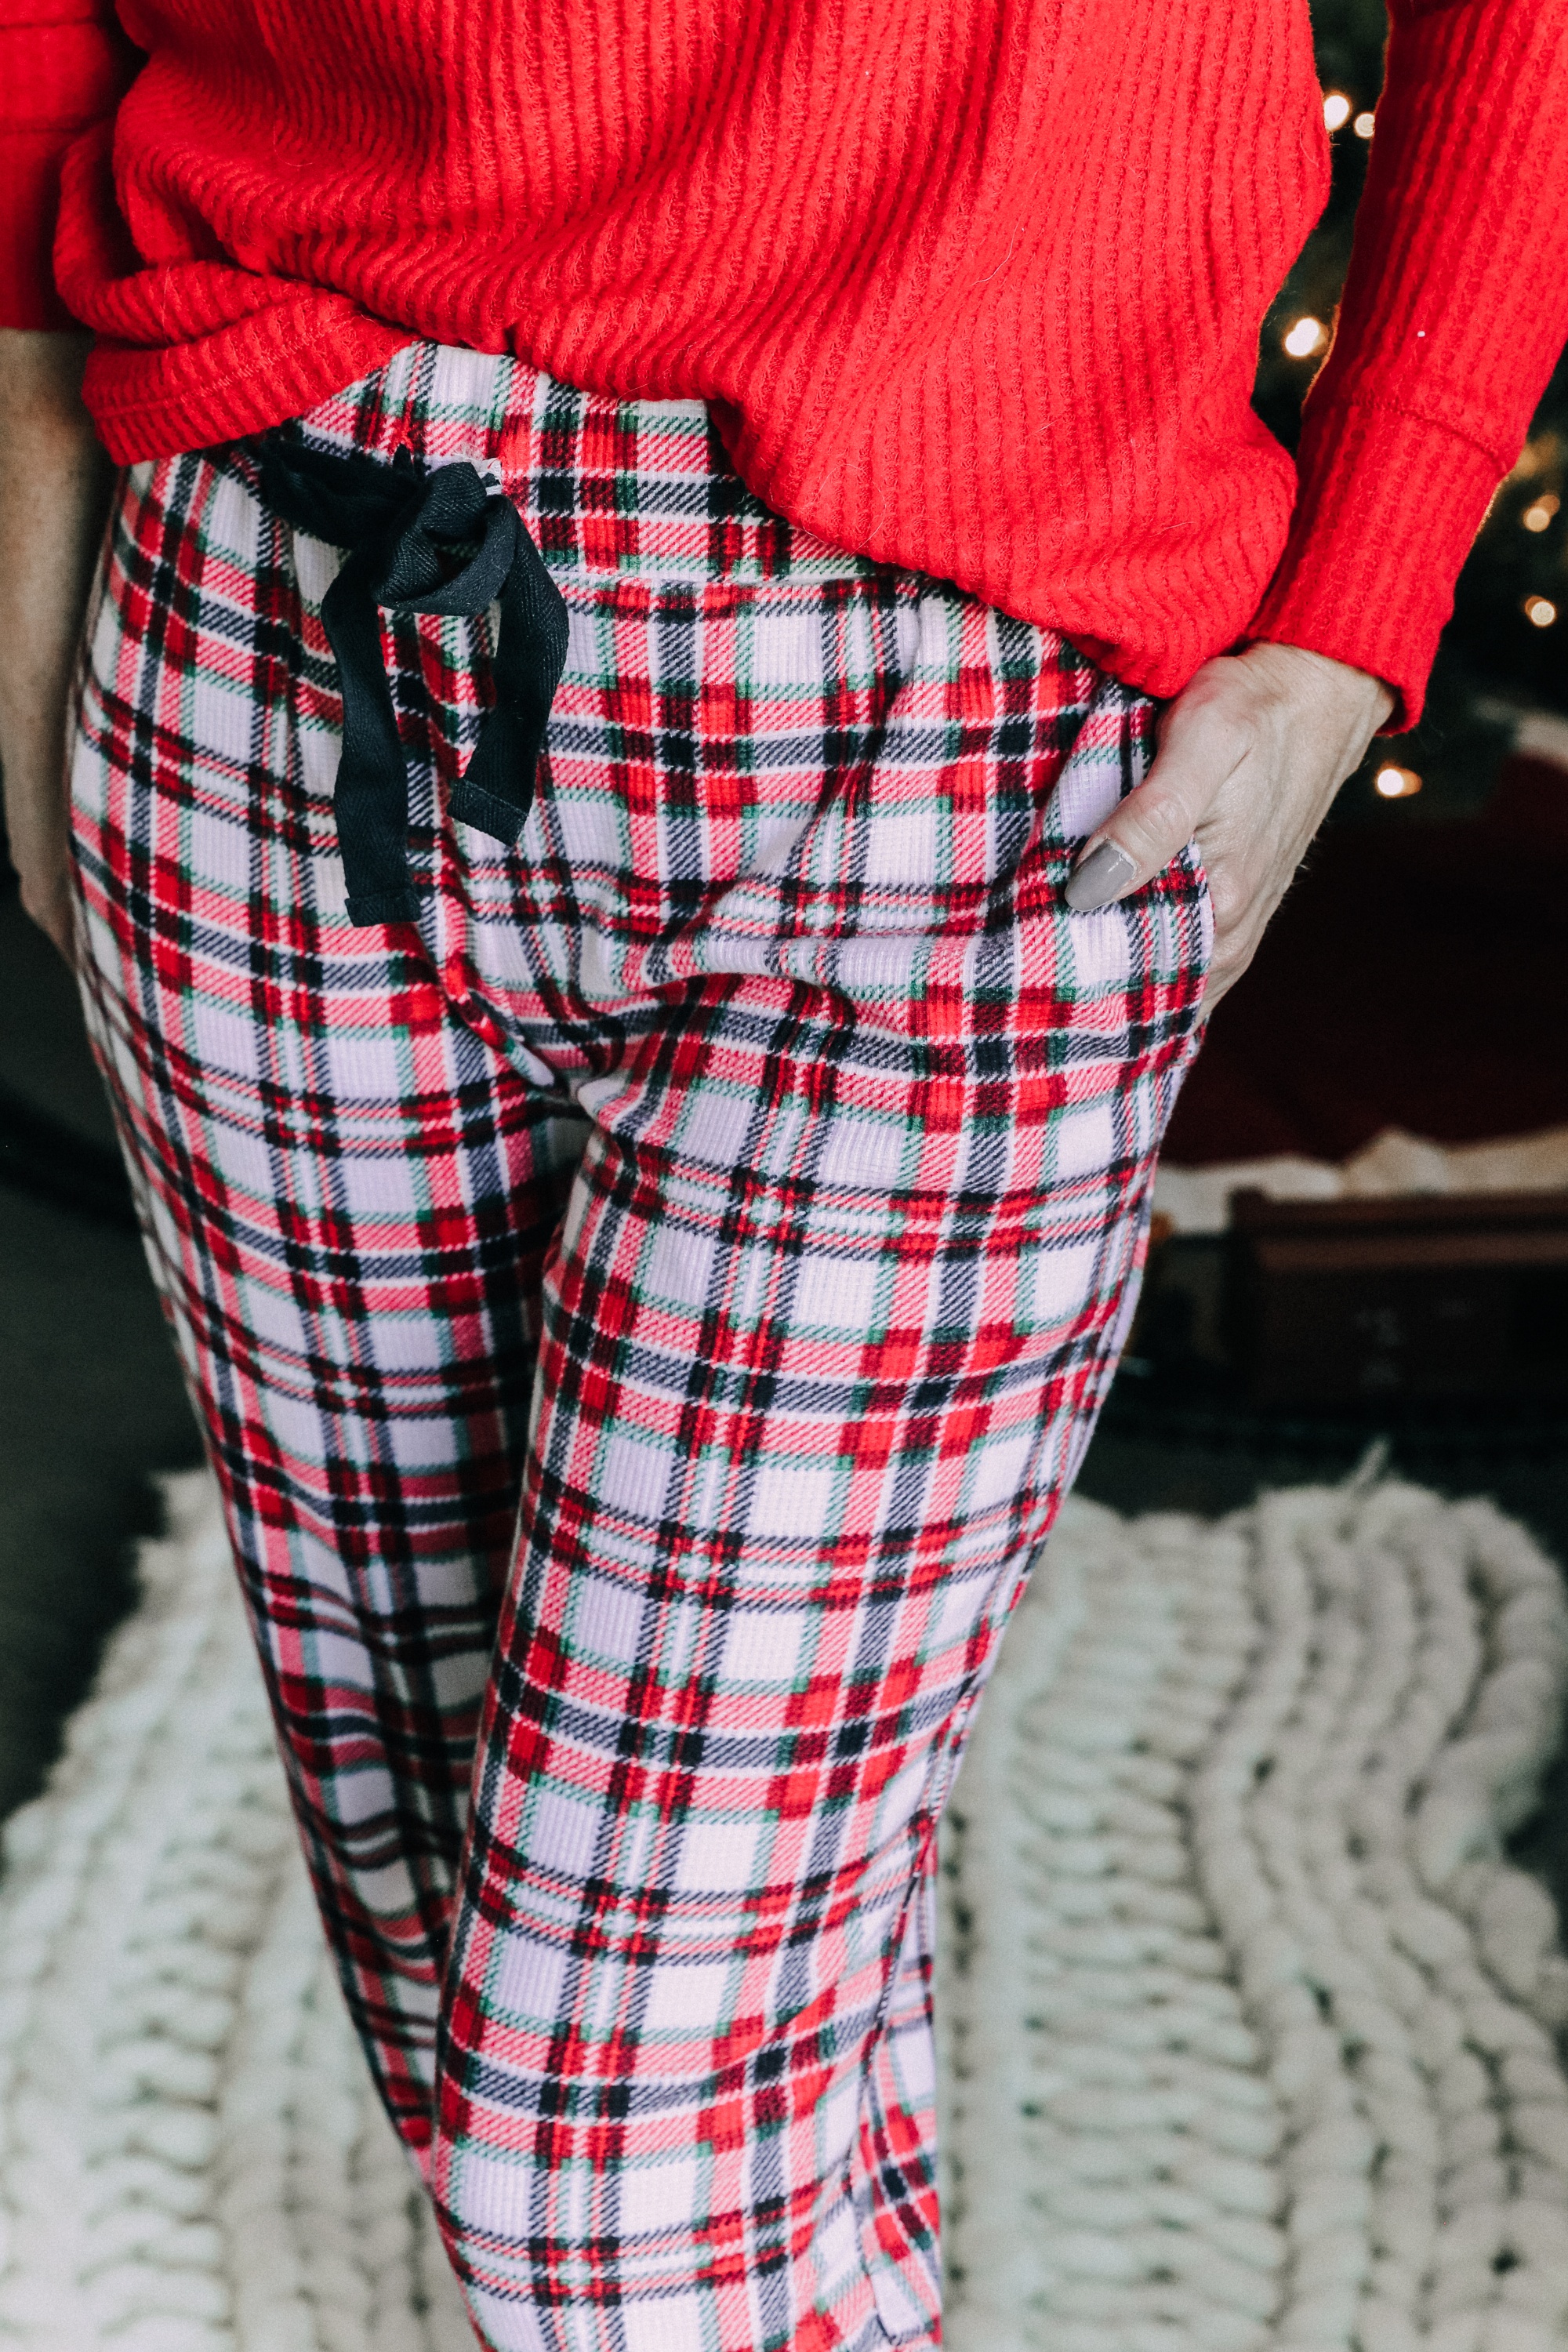 How to make holiday decorating easier, Fashion blogger Erin Busbee of BusbeeStyle.com sharing how to make the holidays more stress free wearing plaid pajamas and a red top by Jockey by her pre-lit tree in Telluride, CO